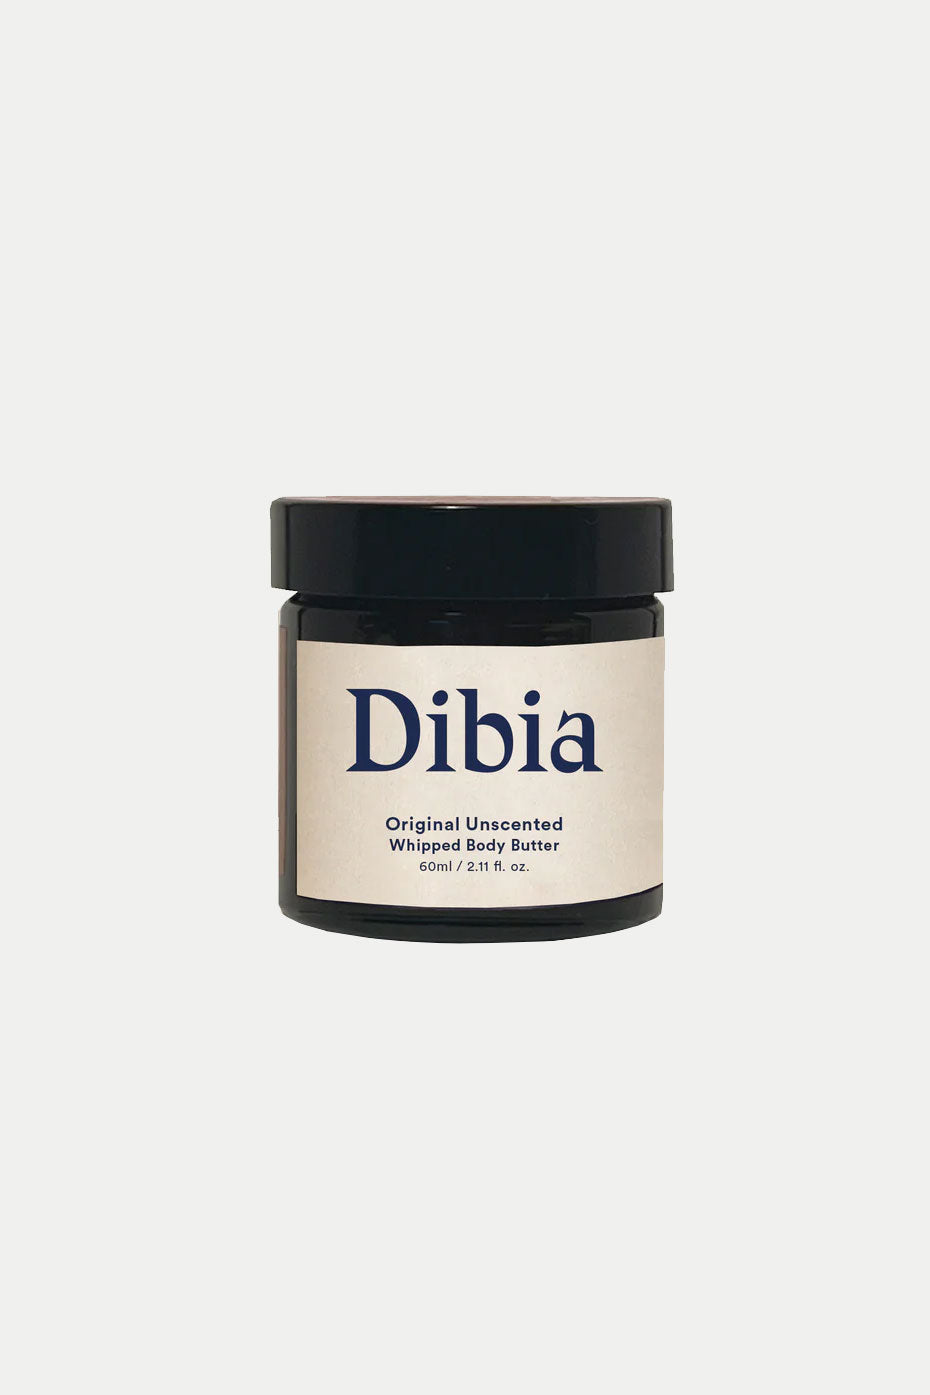 Dibia Original Unscented Whipped Body Butter 60ml